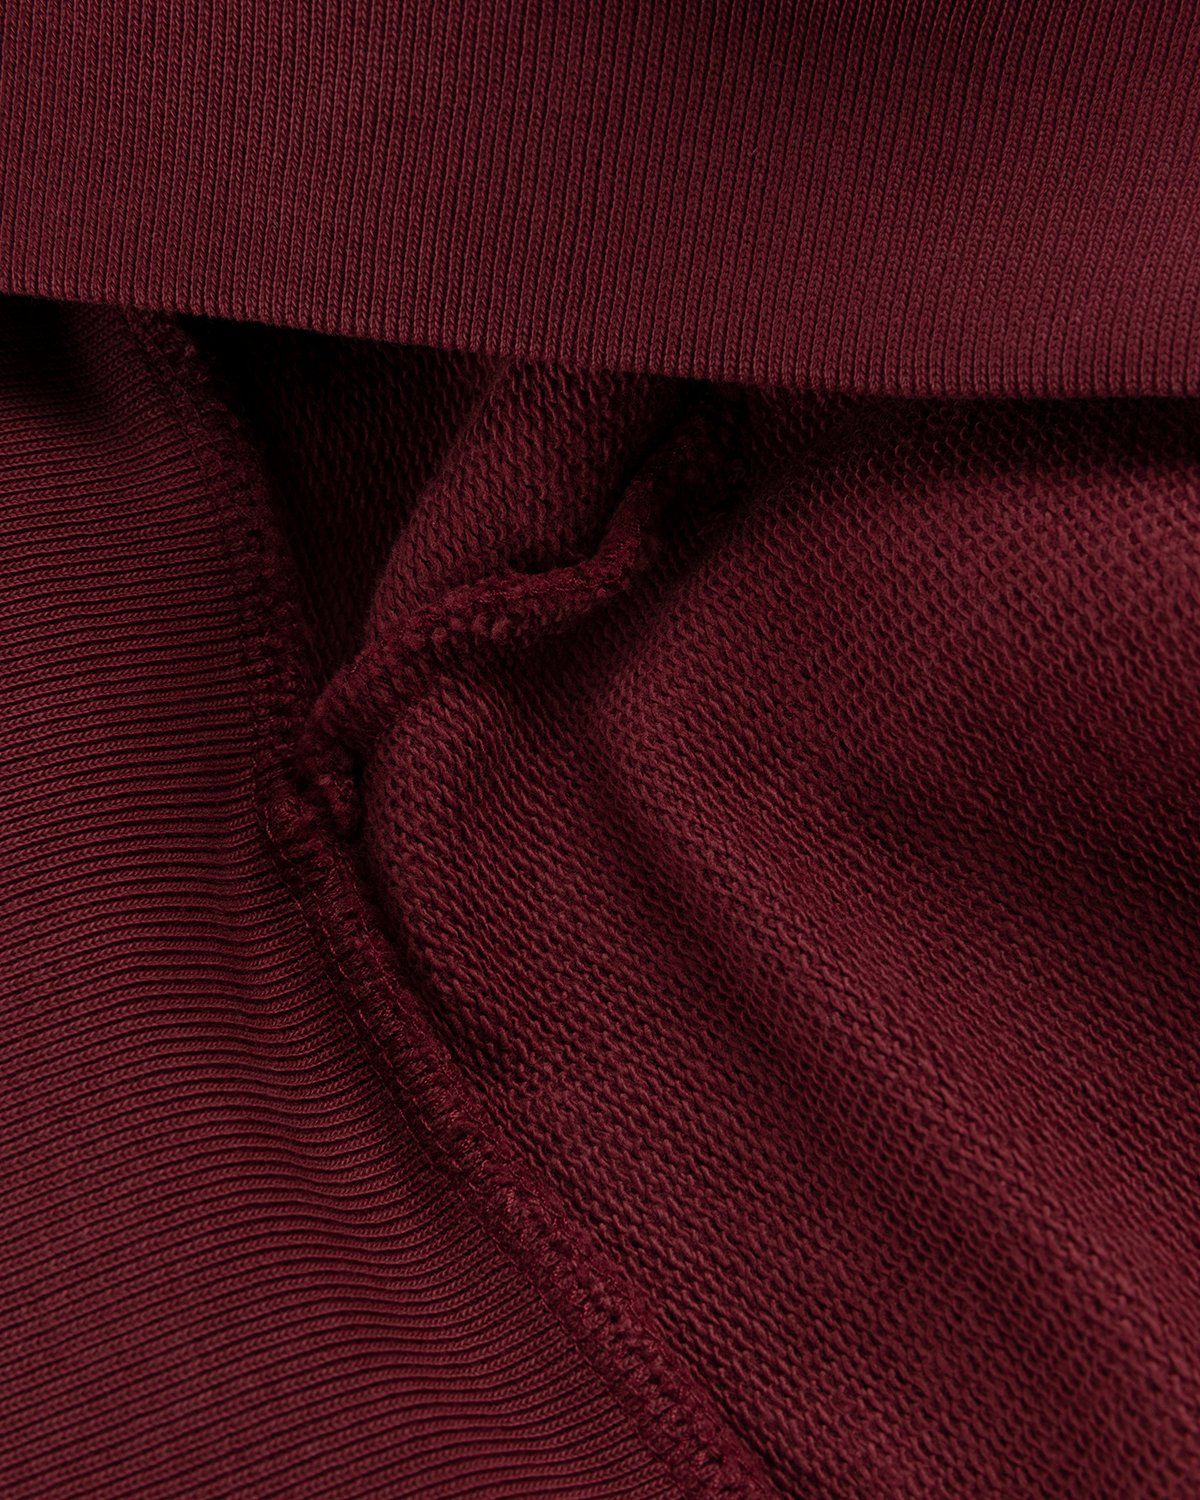 Highsnobiety – HS Sports Focus Hoodie Bordeaux - Sweats - Red - Image 7